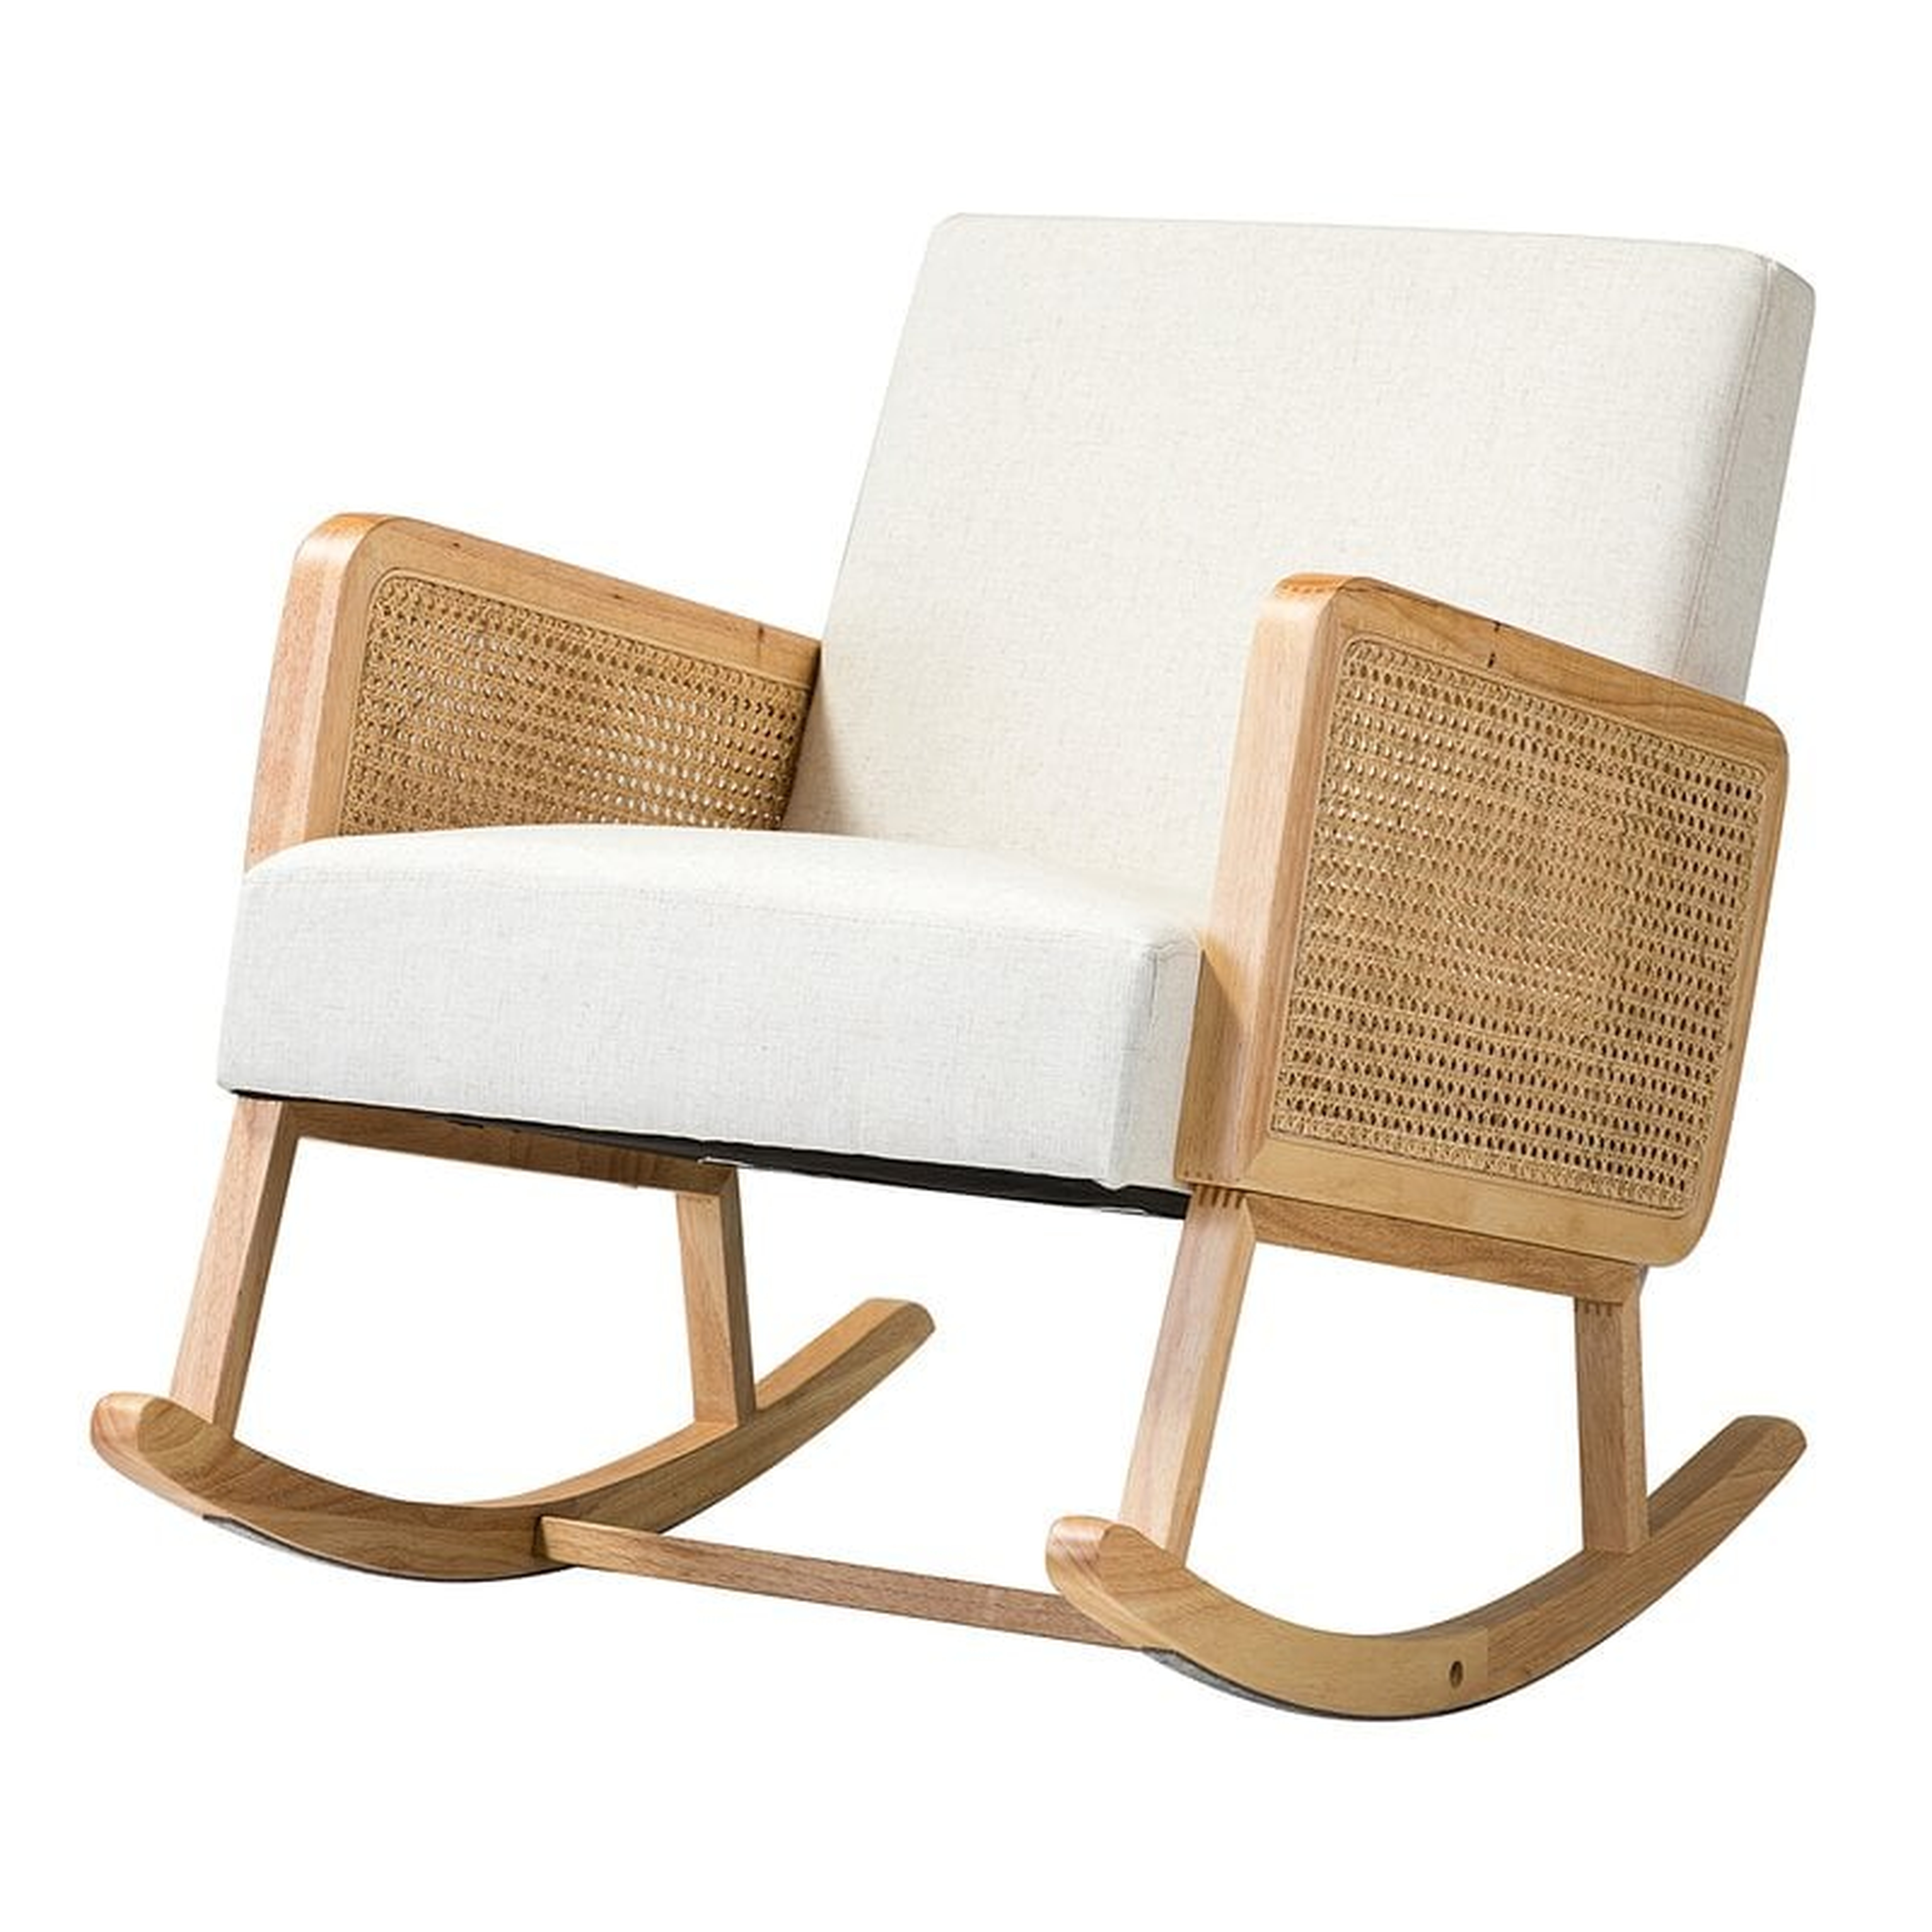 Routh Rocking Chair With Rattan Arms, Beige - Wayfair